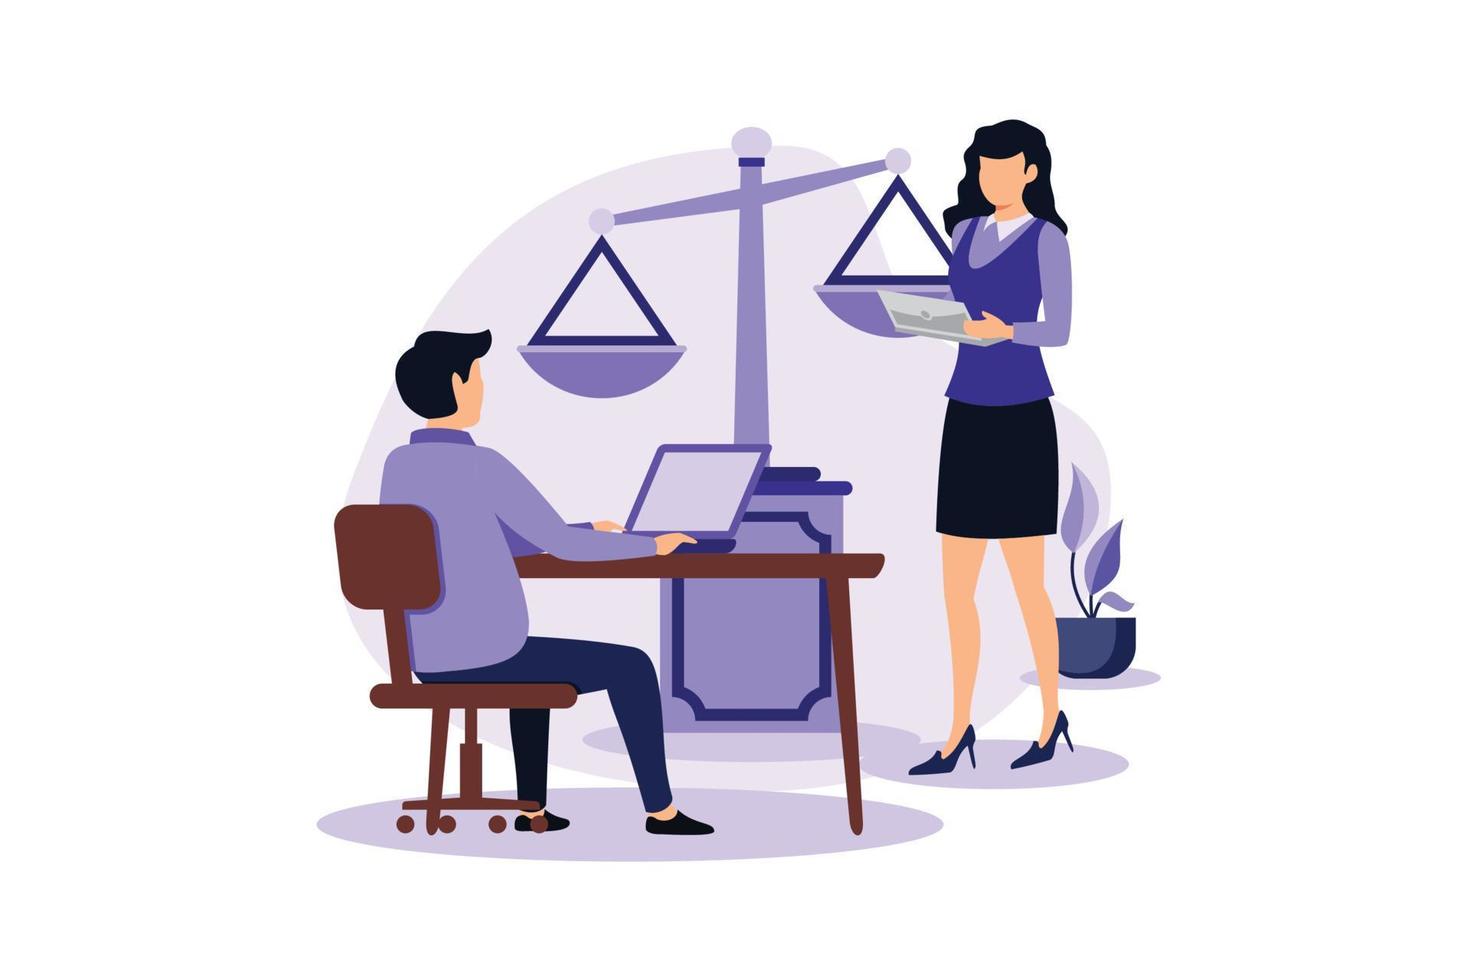 Paralegal services illustration exclusive design inspiration vector